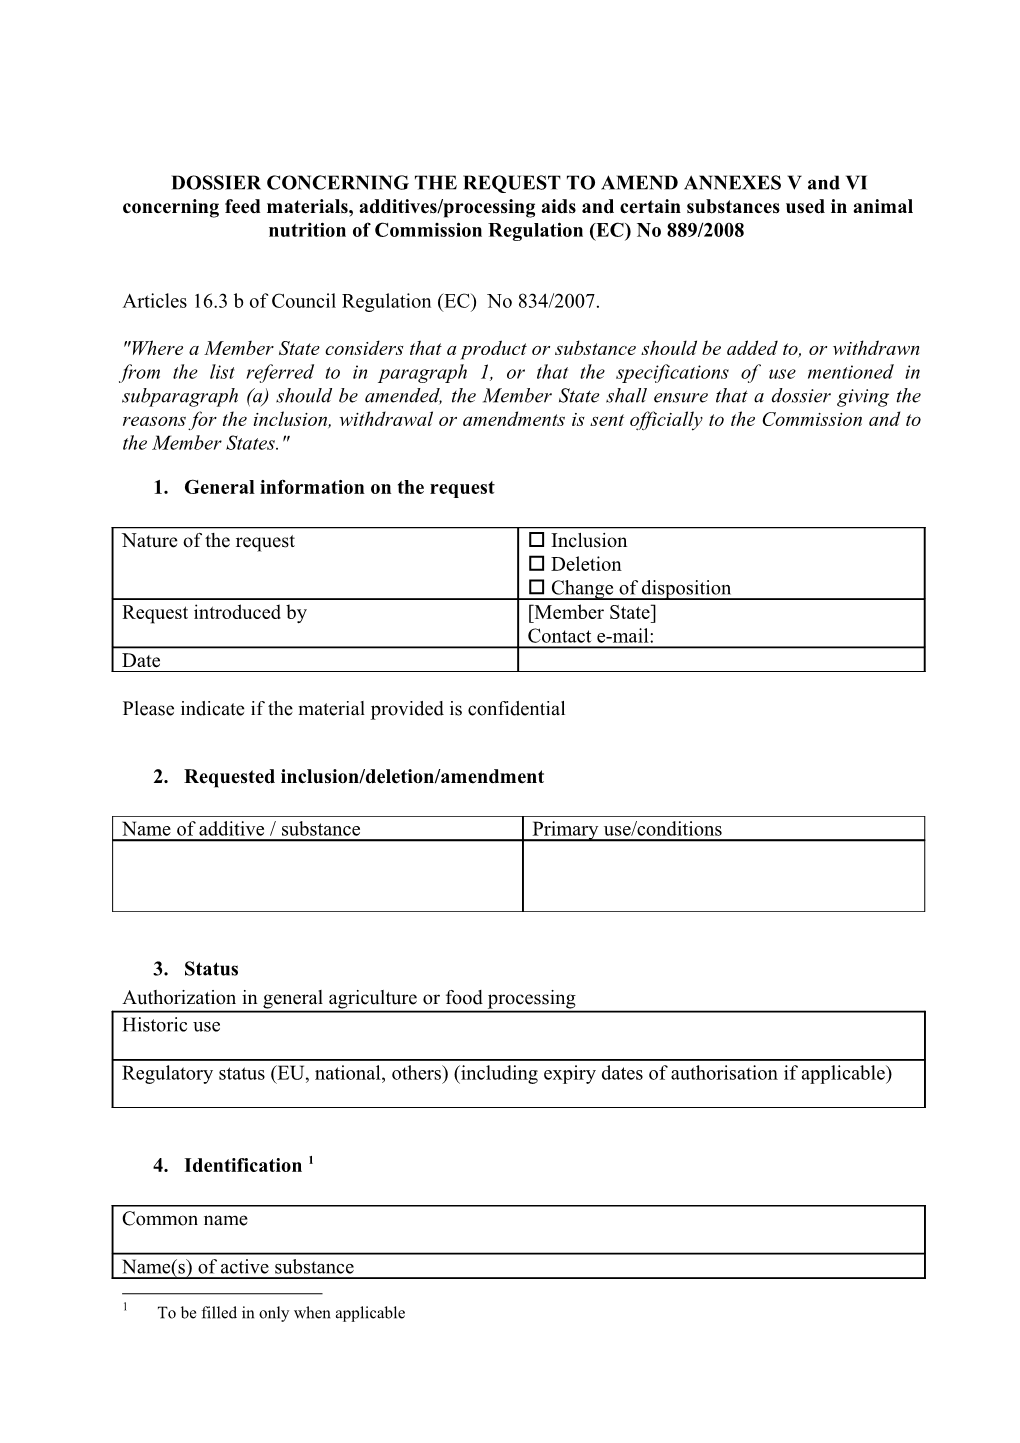 Annex 2: Template for Dossiers Concerning the Request to Amend Annex V and VI of Commission